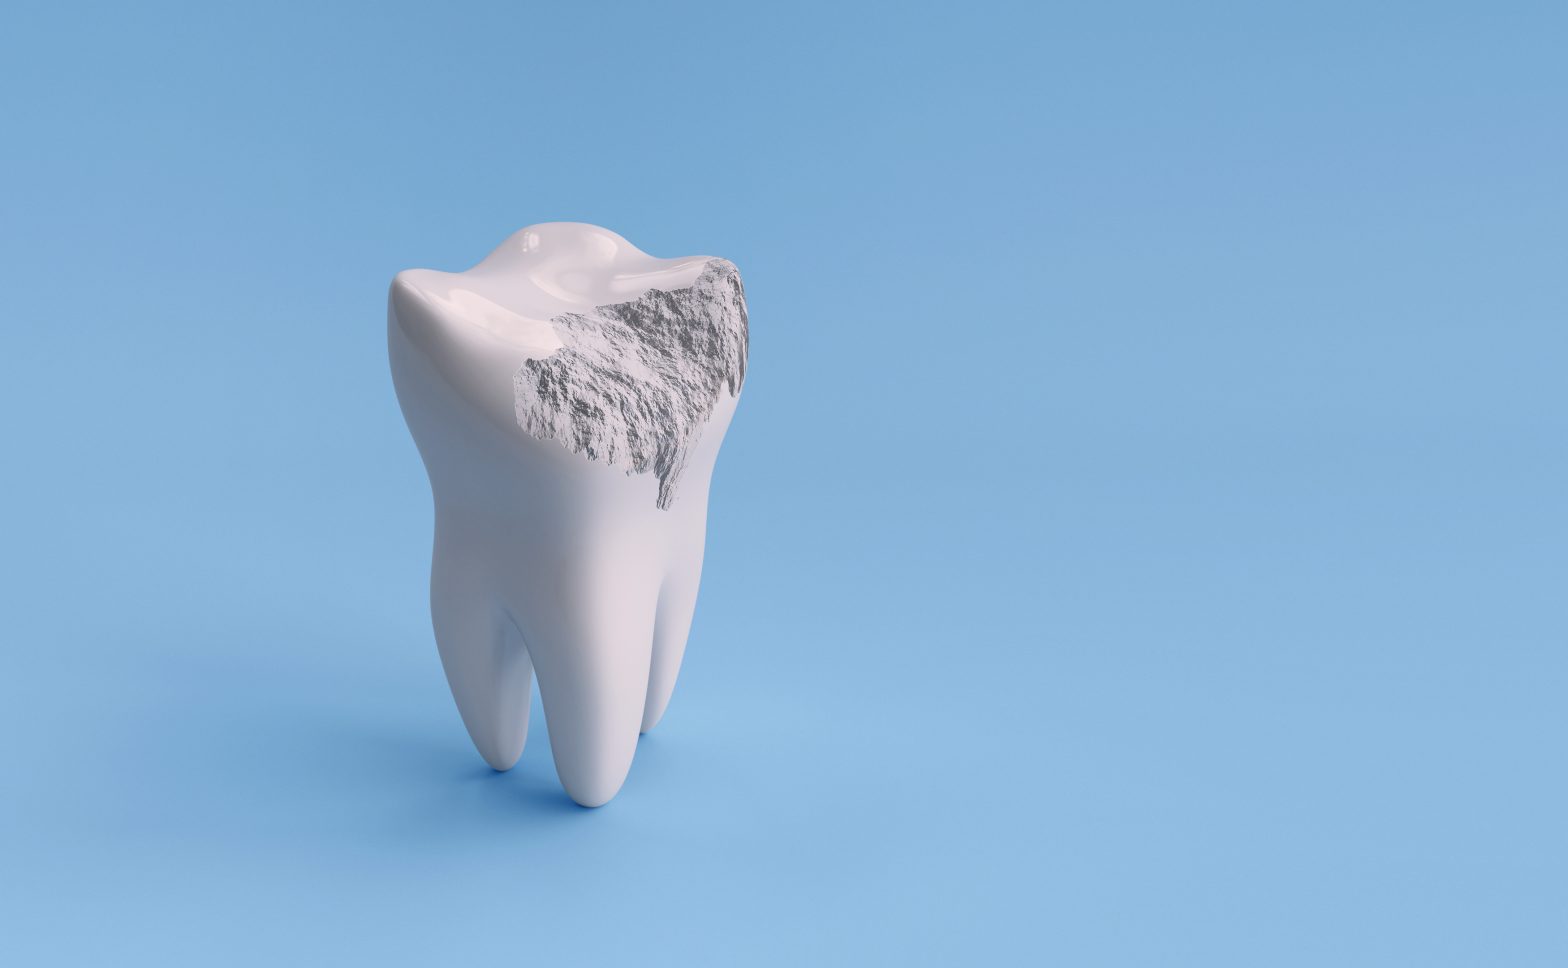 Why am I Losing natural Tooth Enamel?